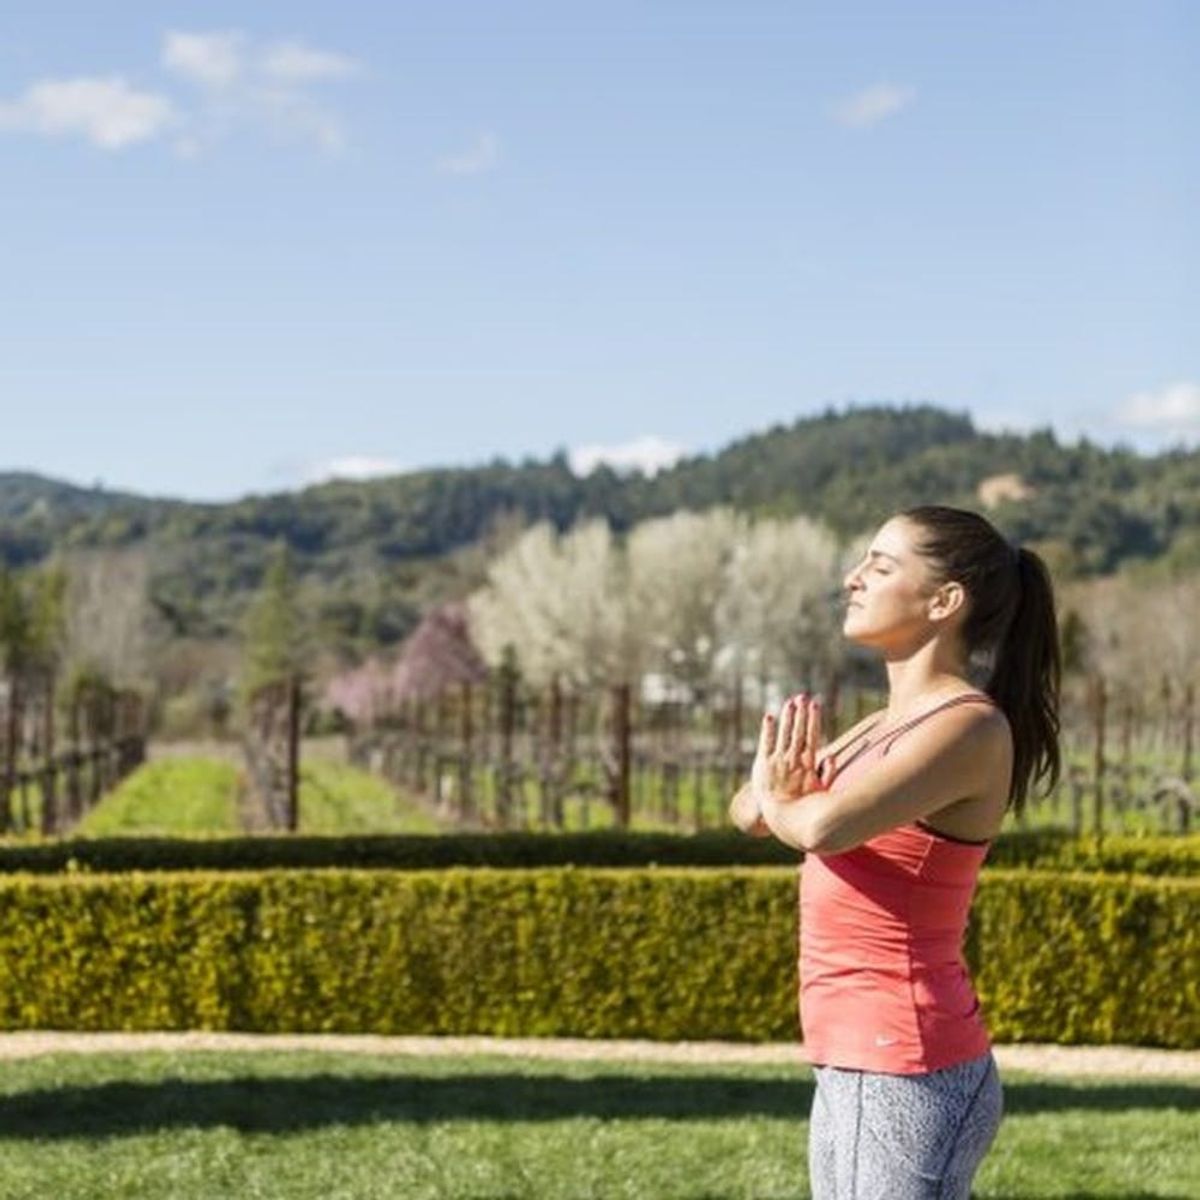 How to Get into a Healthy Mindset for Summer